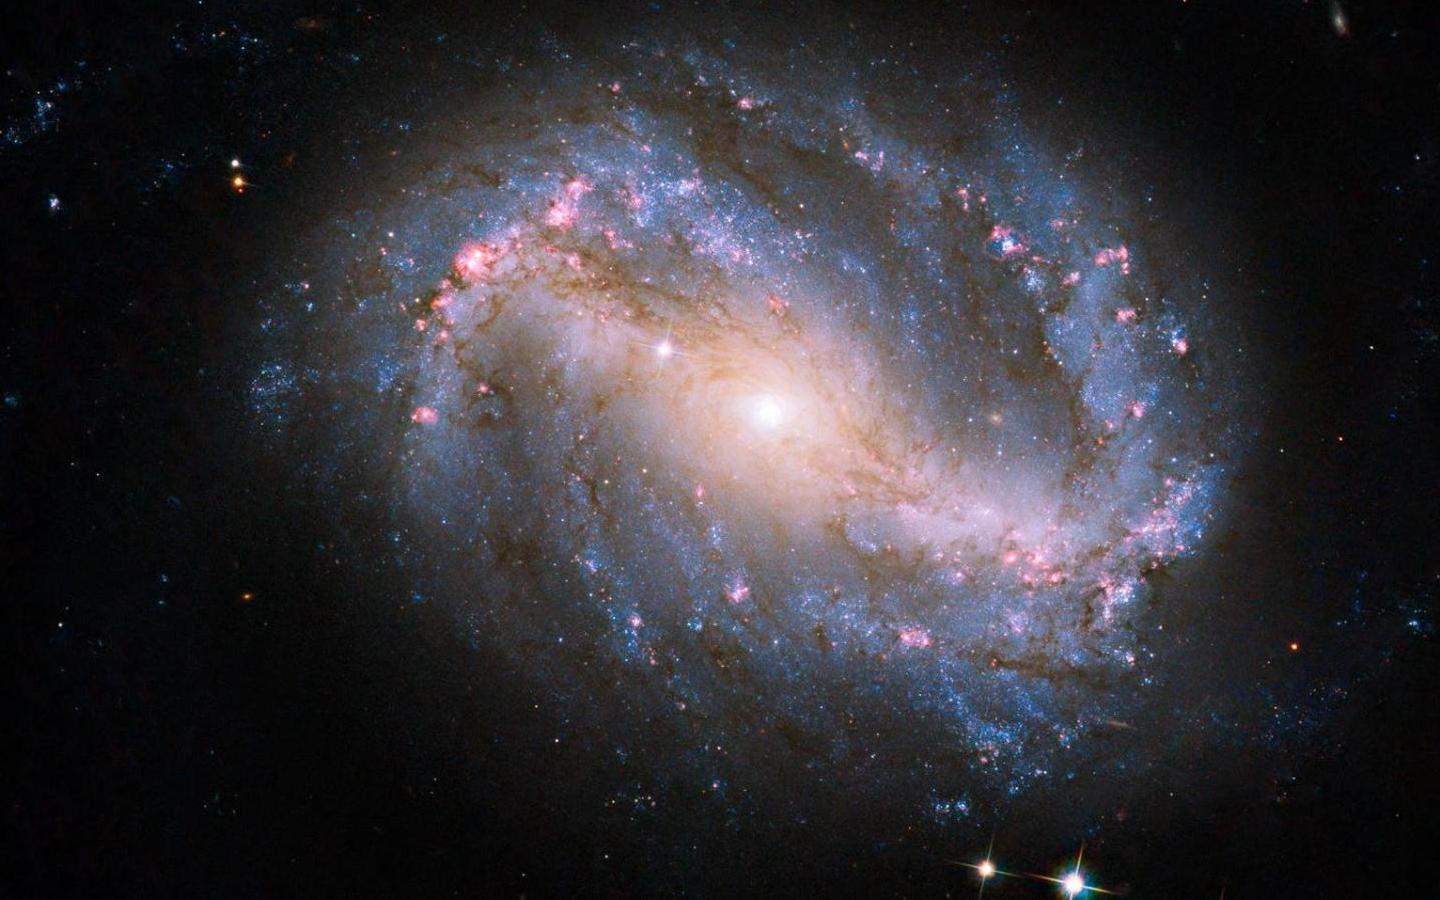 parts of a barred spiral galaxy